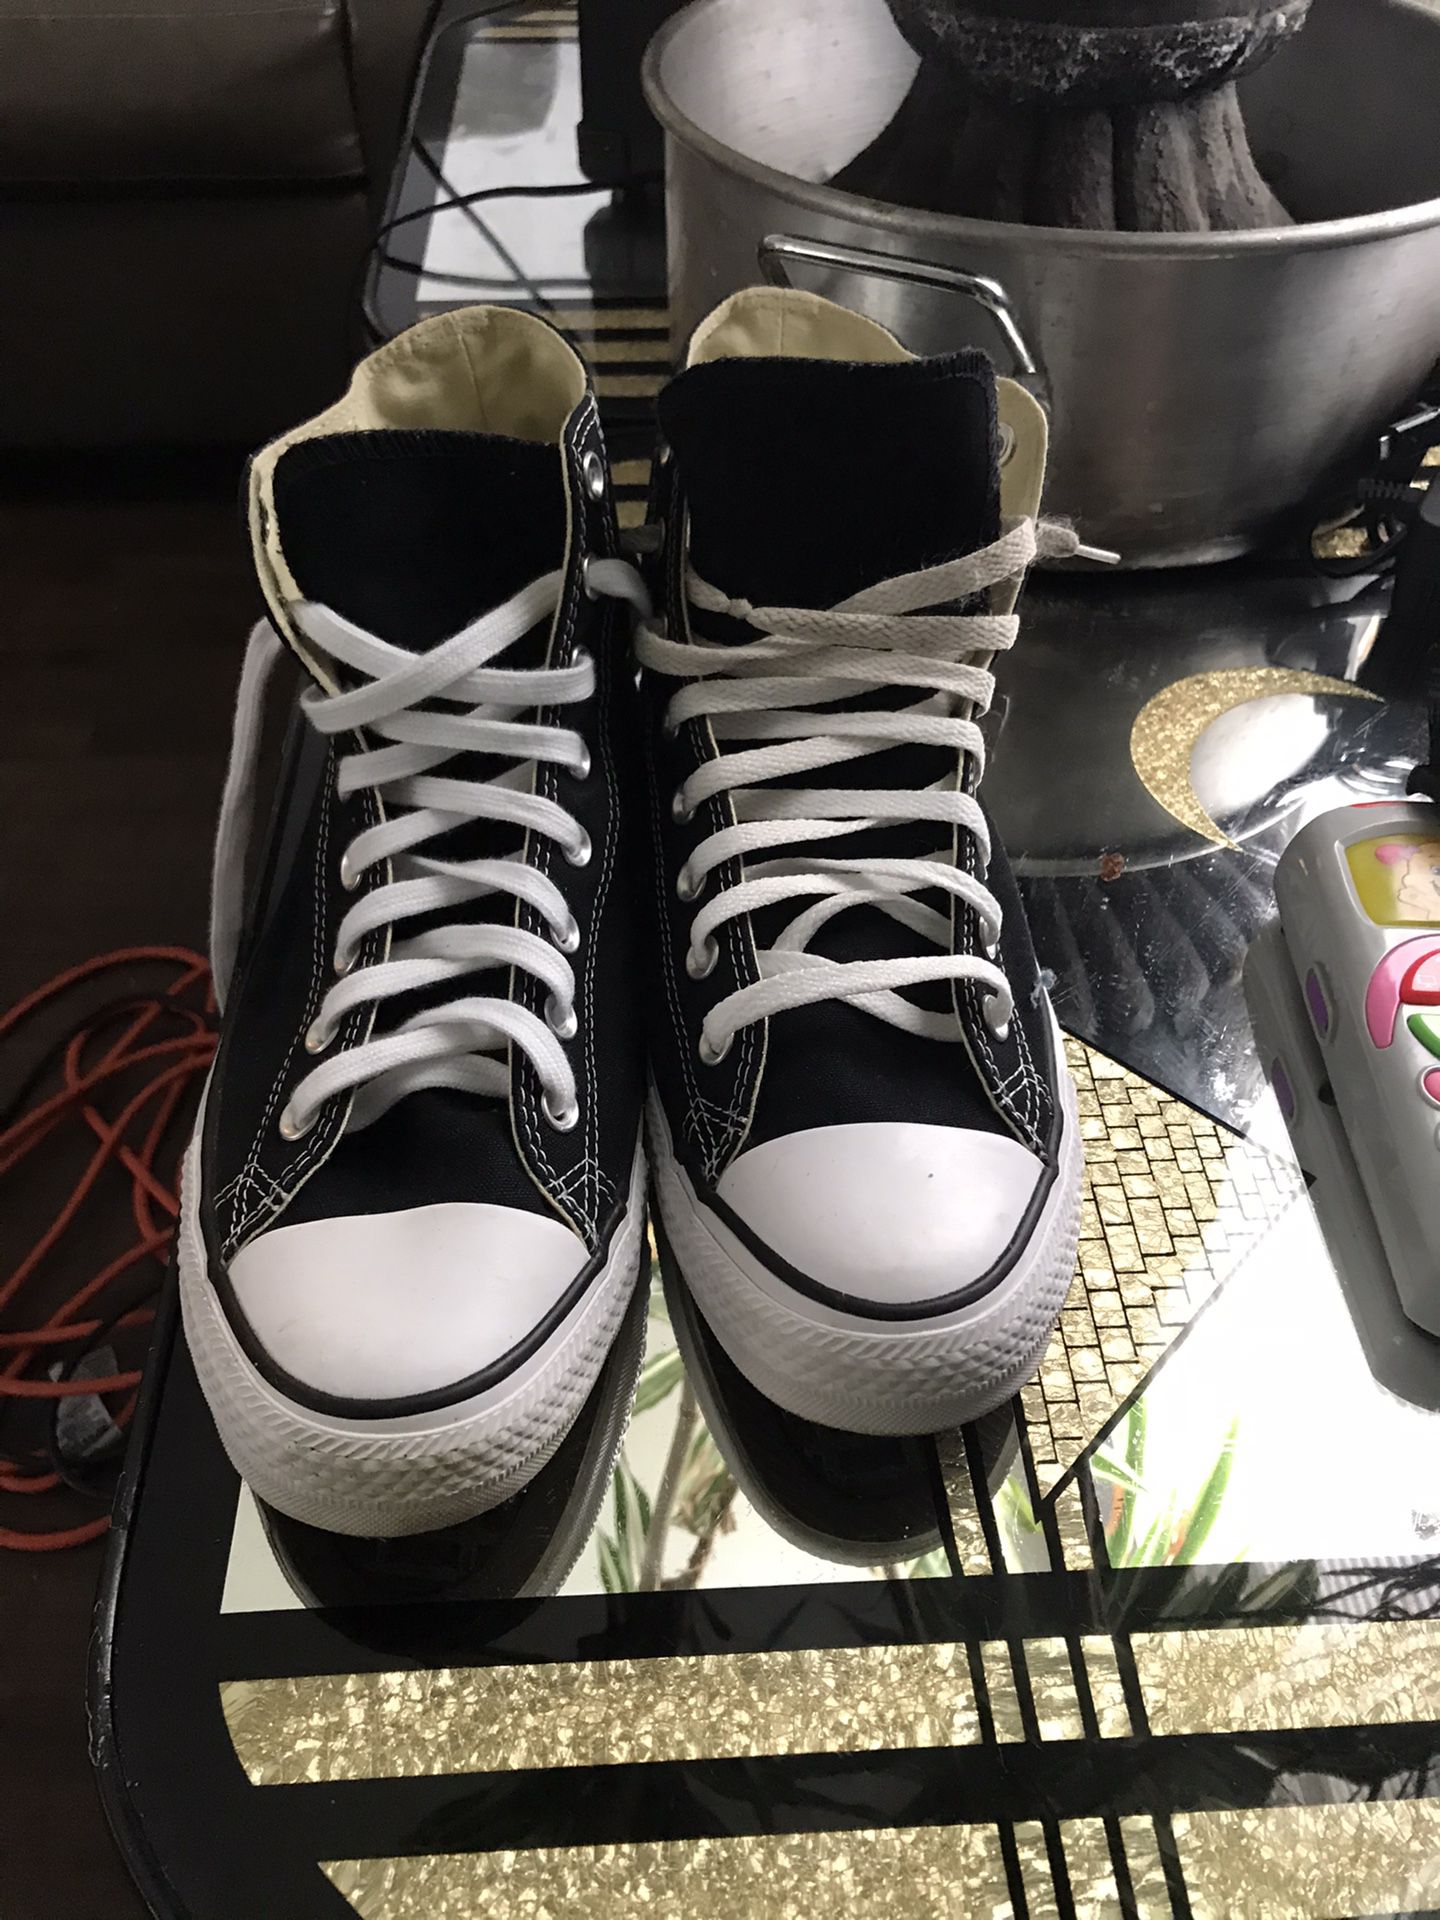 Converse all star chuck taylor black and white size 10